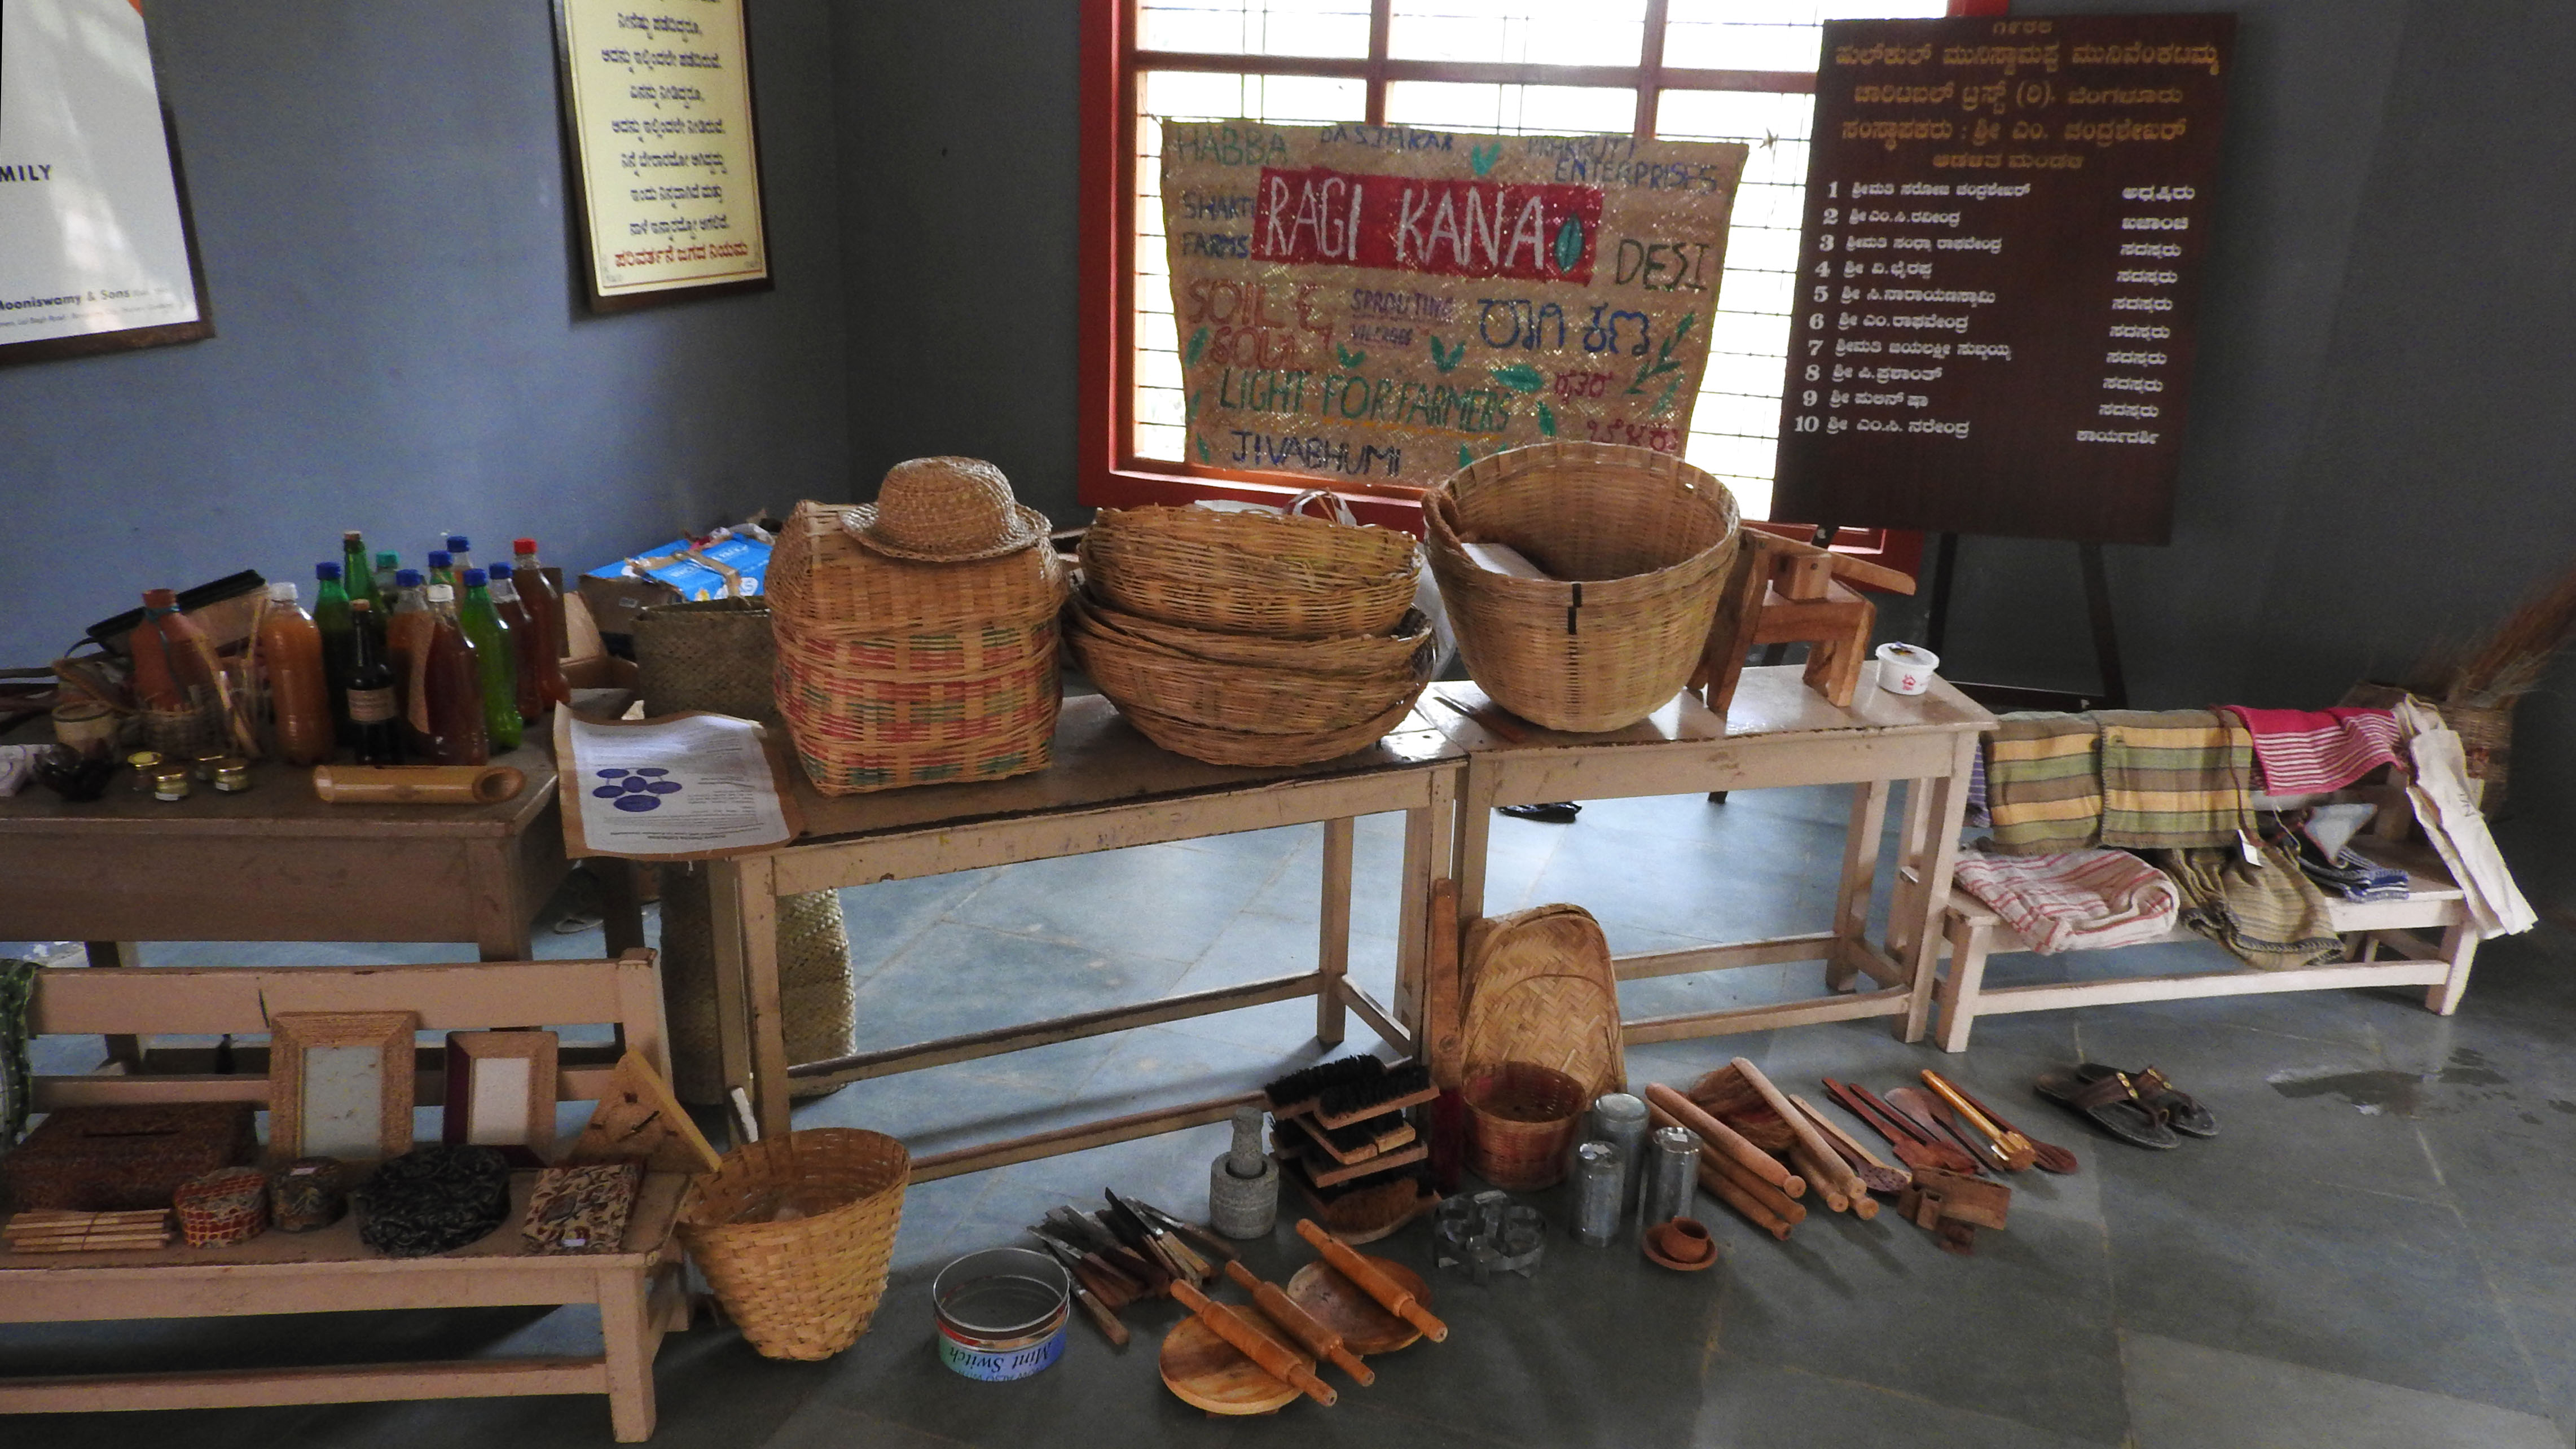 The market also sells local crafts, and one can take part in workshops on cooking, theatre and weaving. Photo by Elita Almeida